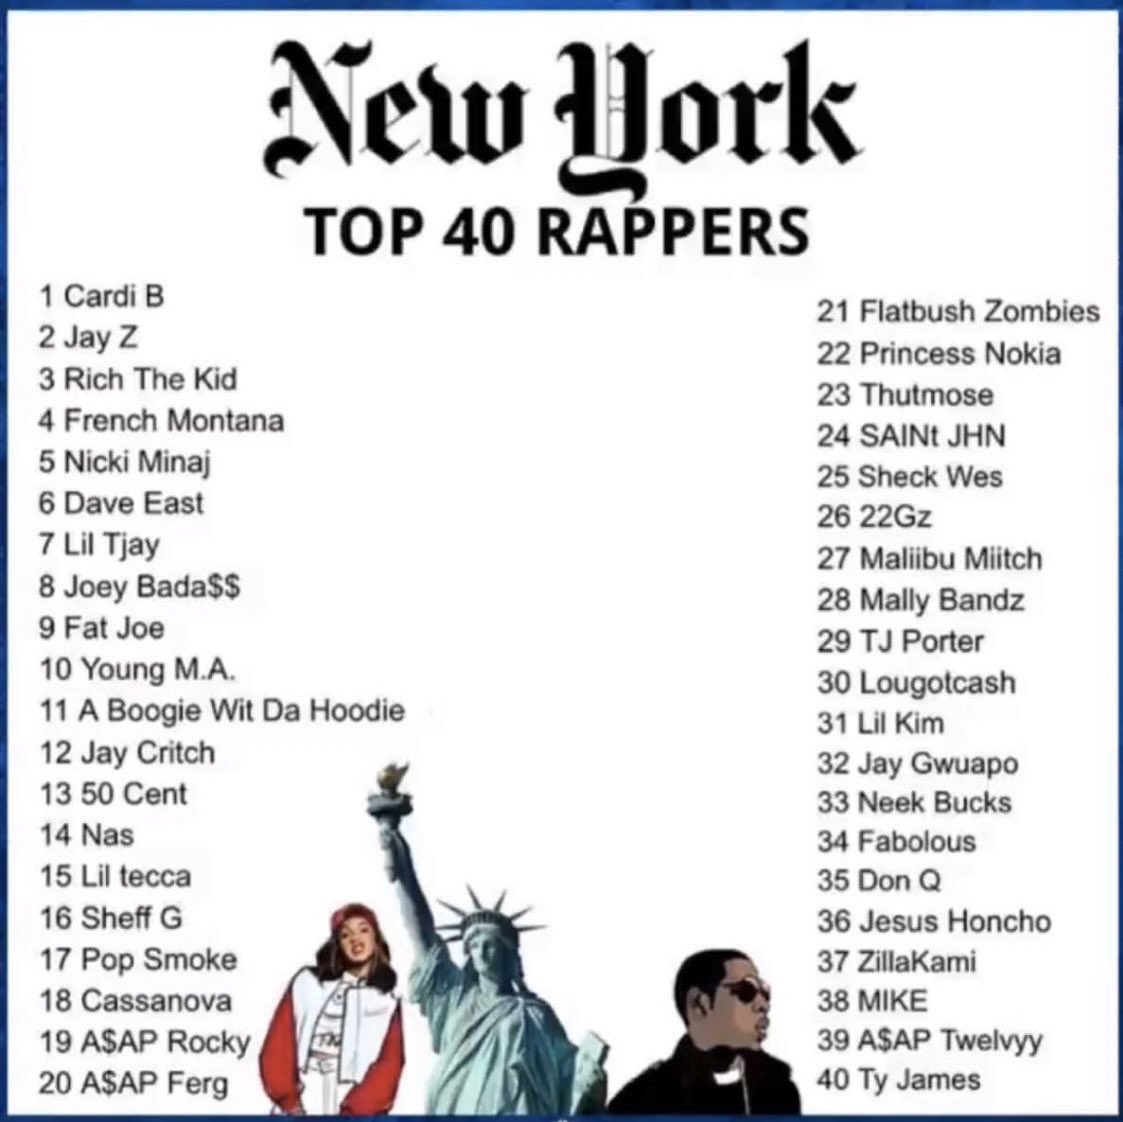 HipHopDX on "Apparently its list szn and rich the kid just offered the top rappers from New York‼️ 🗽 Cardi B 🗽 JAY Z 🗽 Rich The Kid 🗽 French